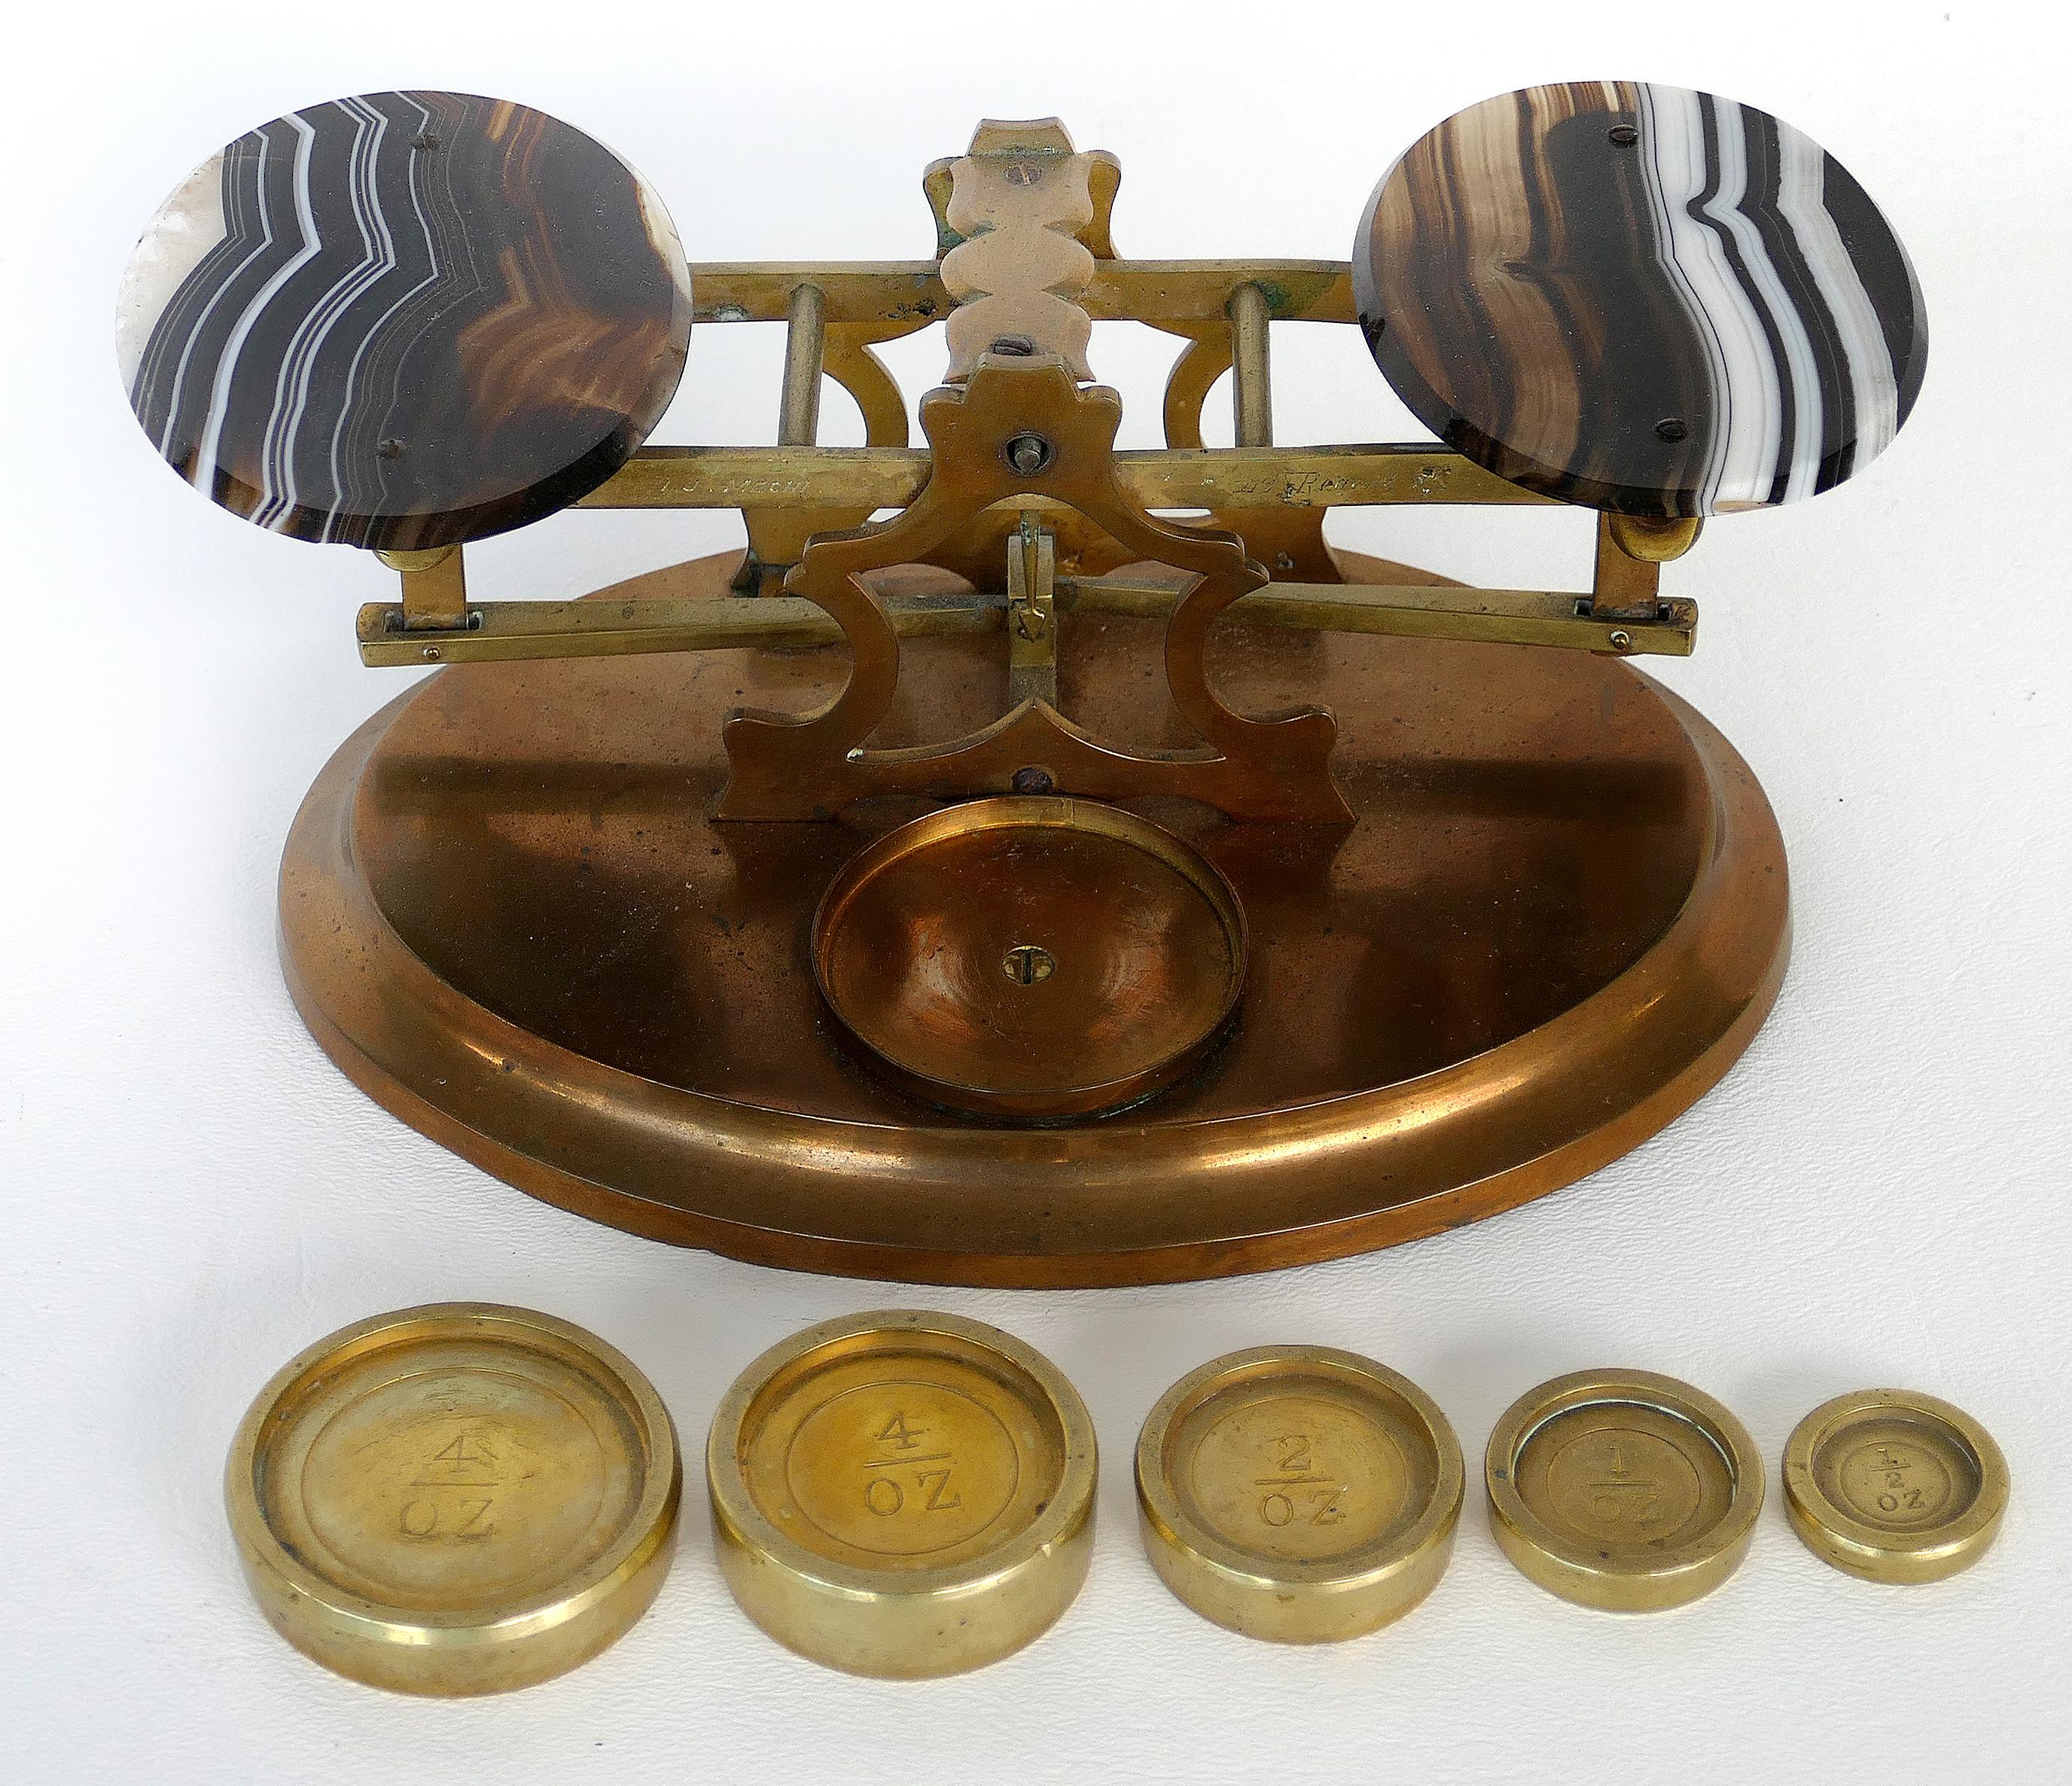 John Joseph Mechi brass and agate scales and weights, London 

Offered for sale is a fine mid-19th century brass and agate brass scale with brass weights in varying sizes by London based silversmith, banker and inventor John Joseph Mechi